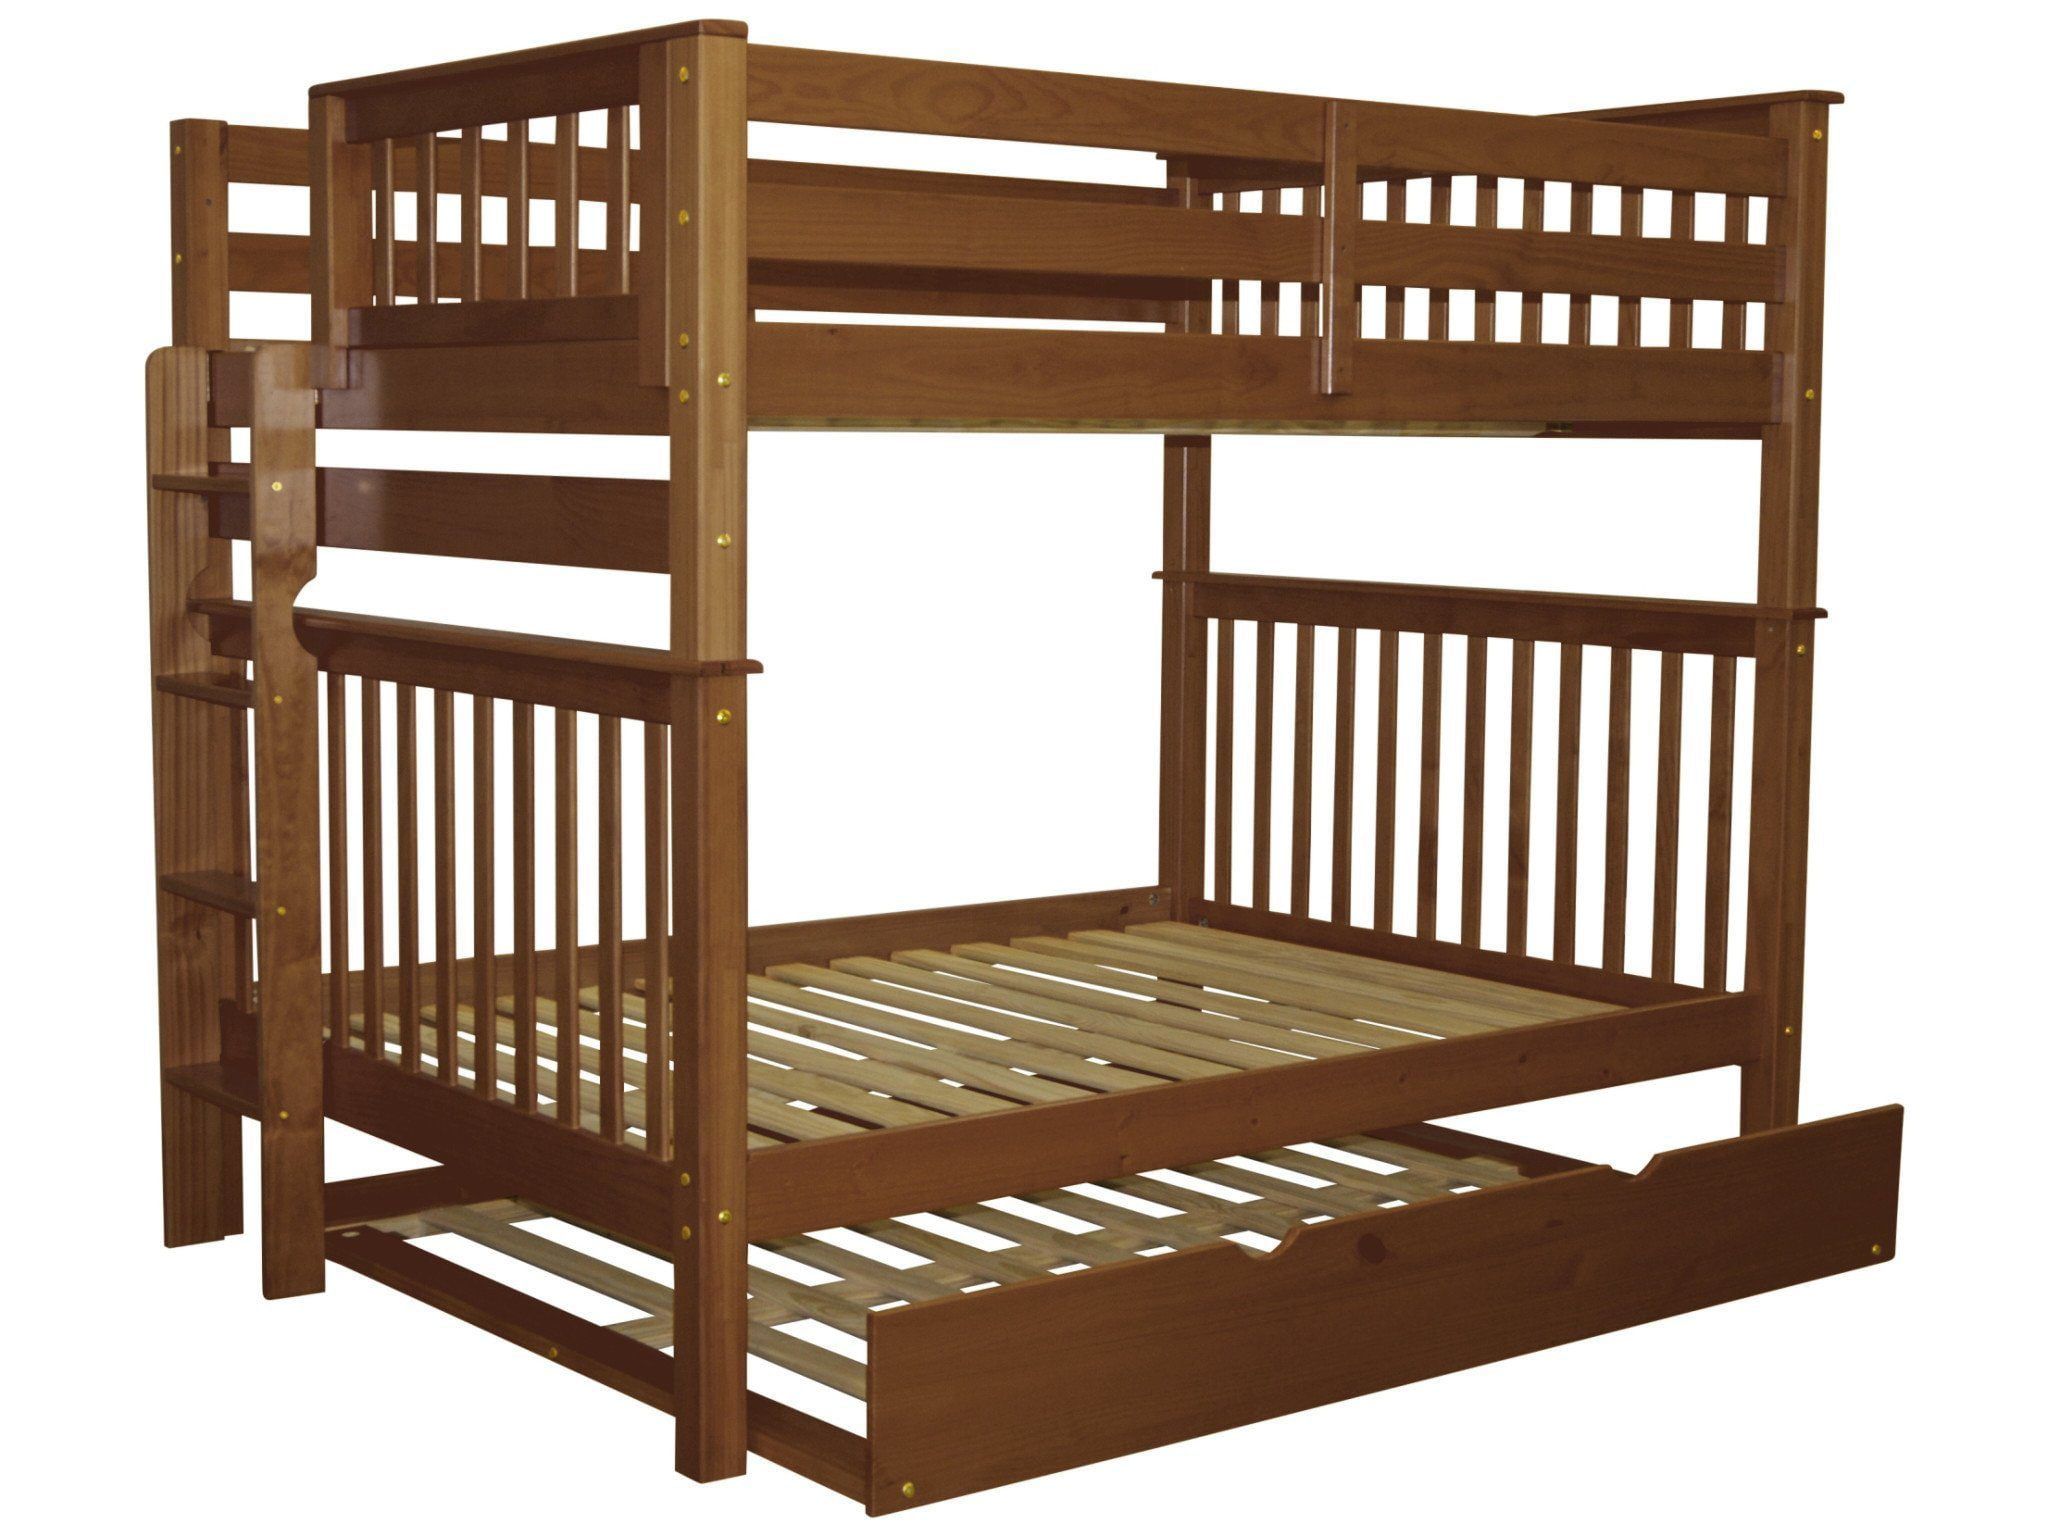 full over king bunk bed